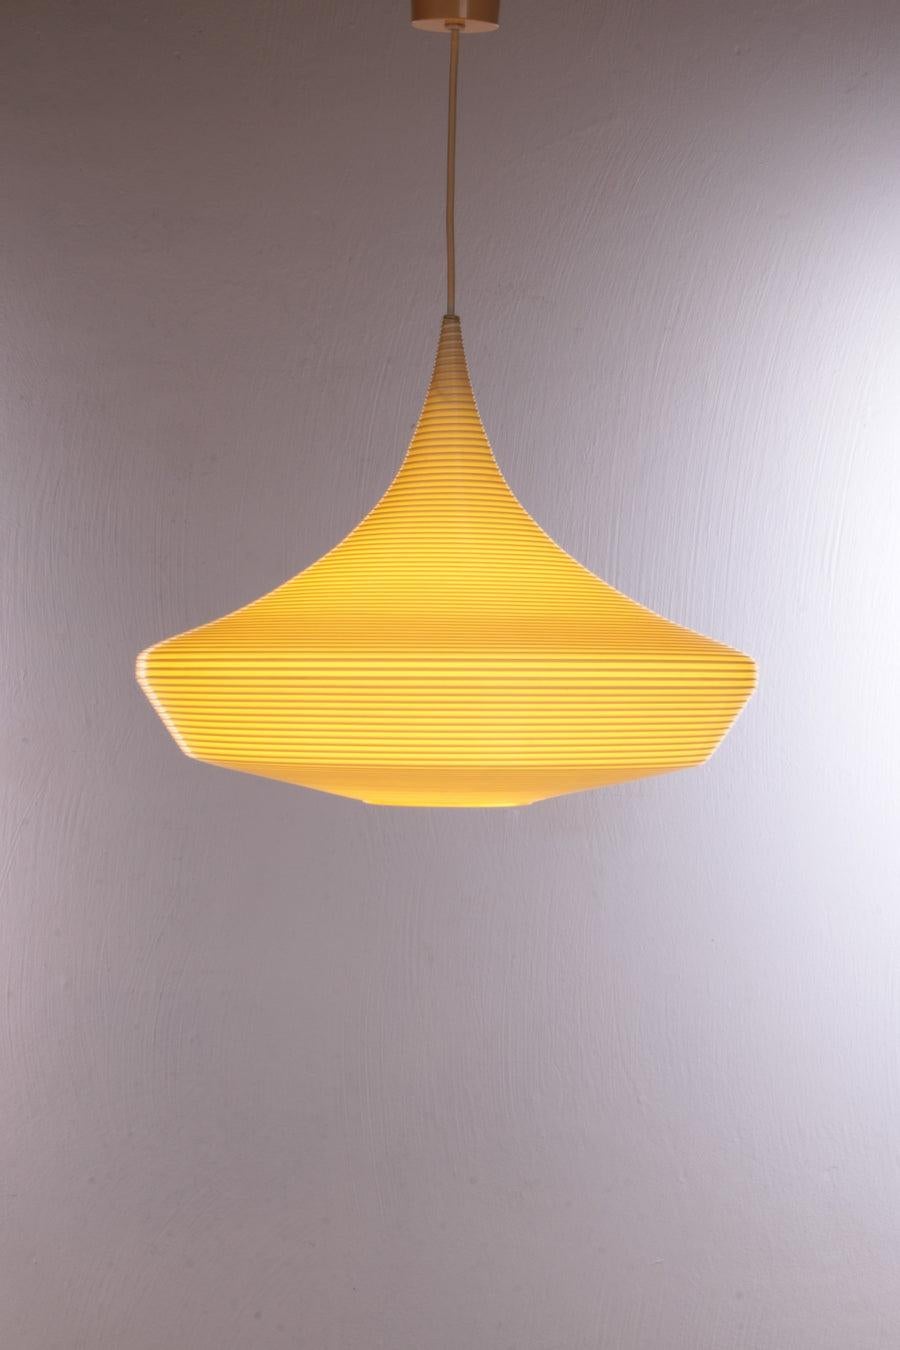 Vintage Pendant Lamp by Yasha Heifetz for Rotaflex Heifetz, 1960s

It is a minimalist hanging lamp made of plastic.

The symmetrical luminaire housing is made of translucent plastic (Rotaflex) and has a grooved structure all around.

Due to its